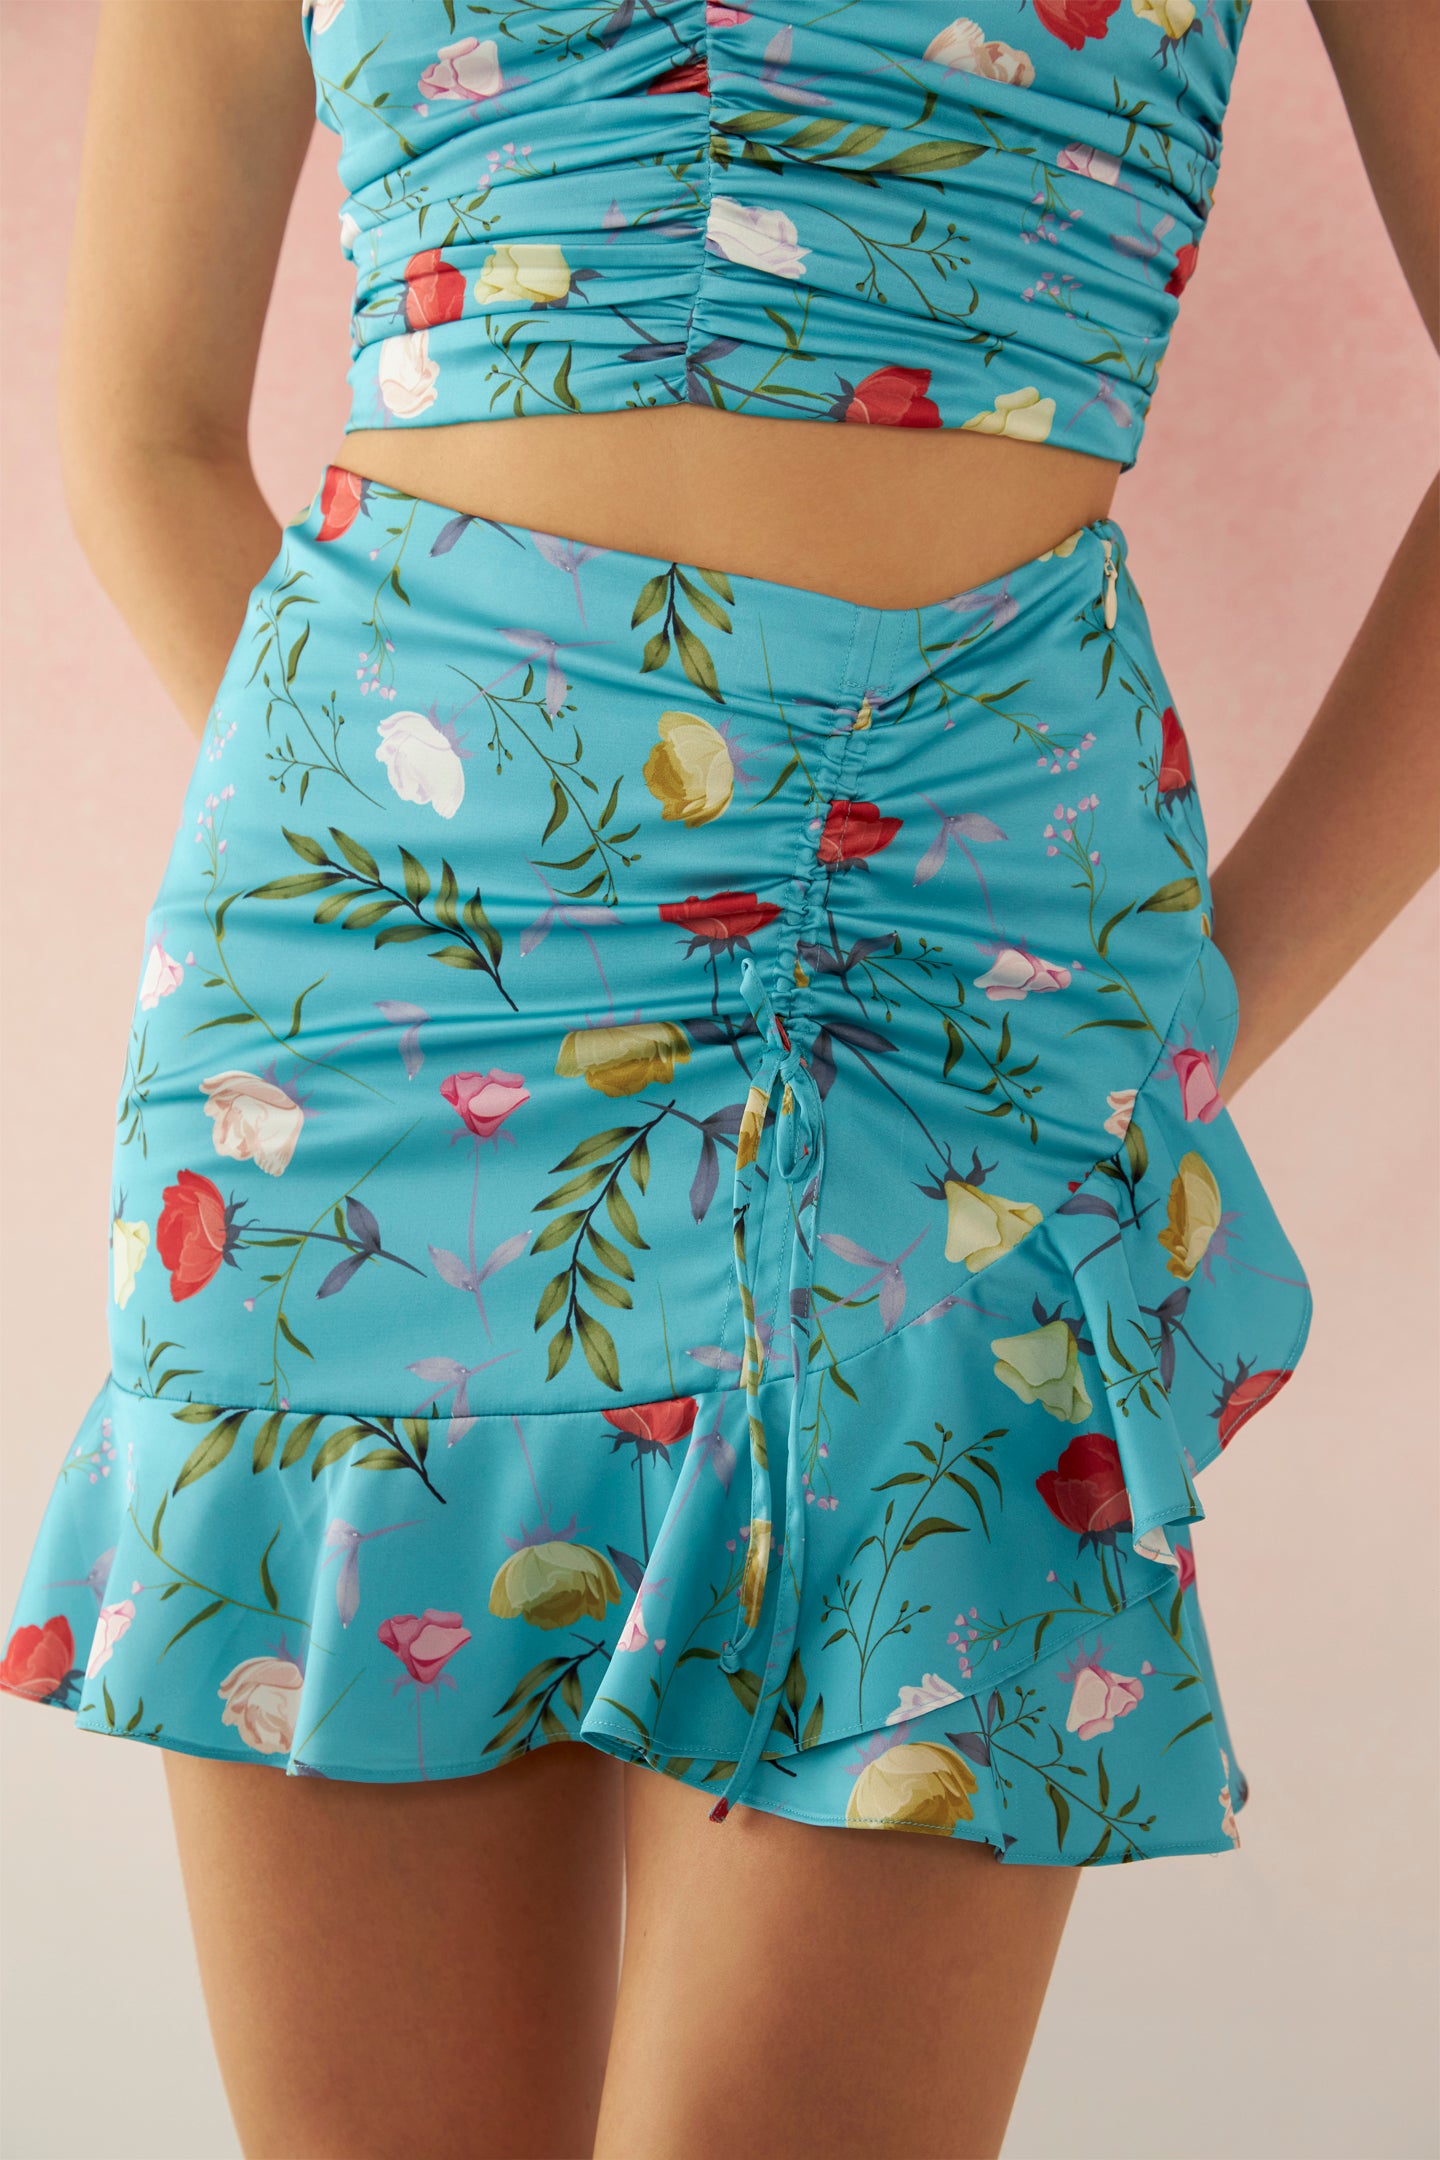 Danica Skirt|Sultry Recycled Polyester Floral Skirt